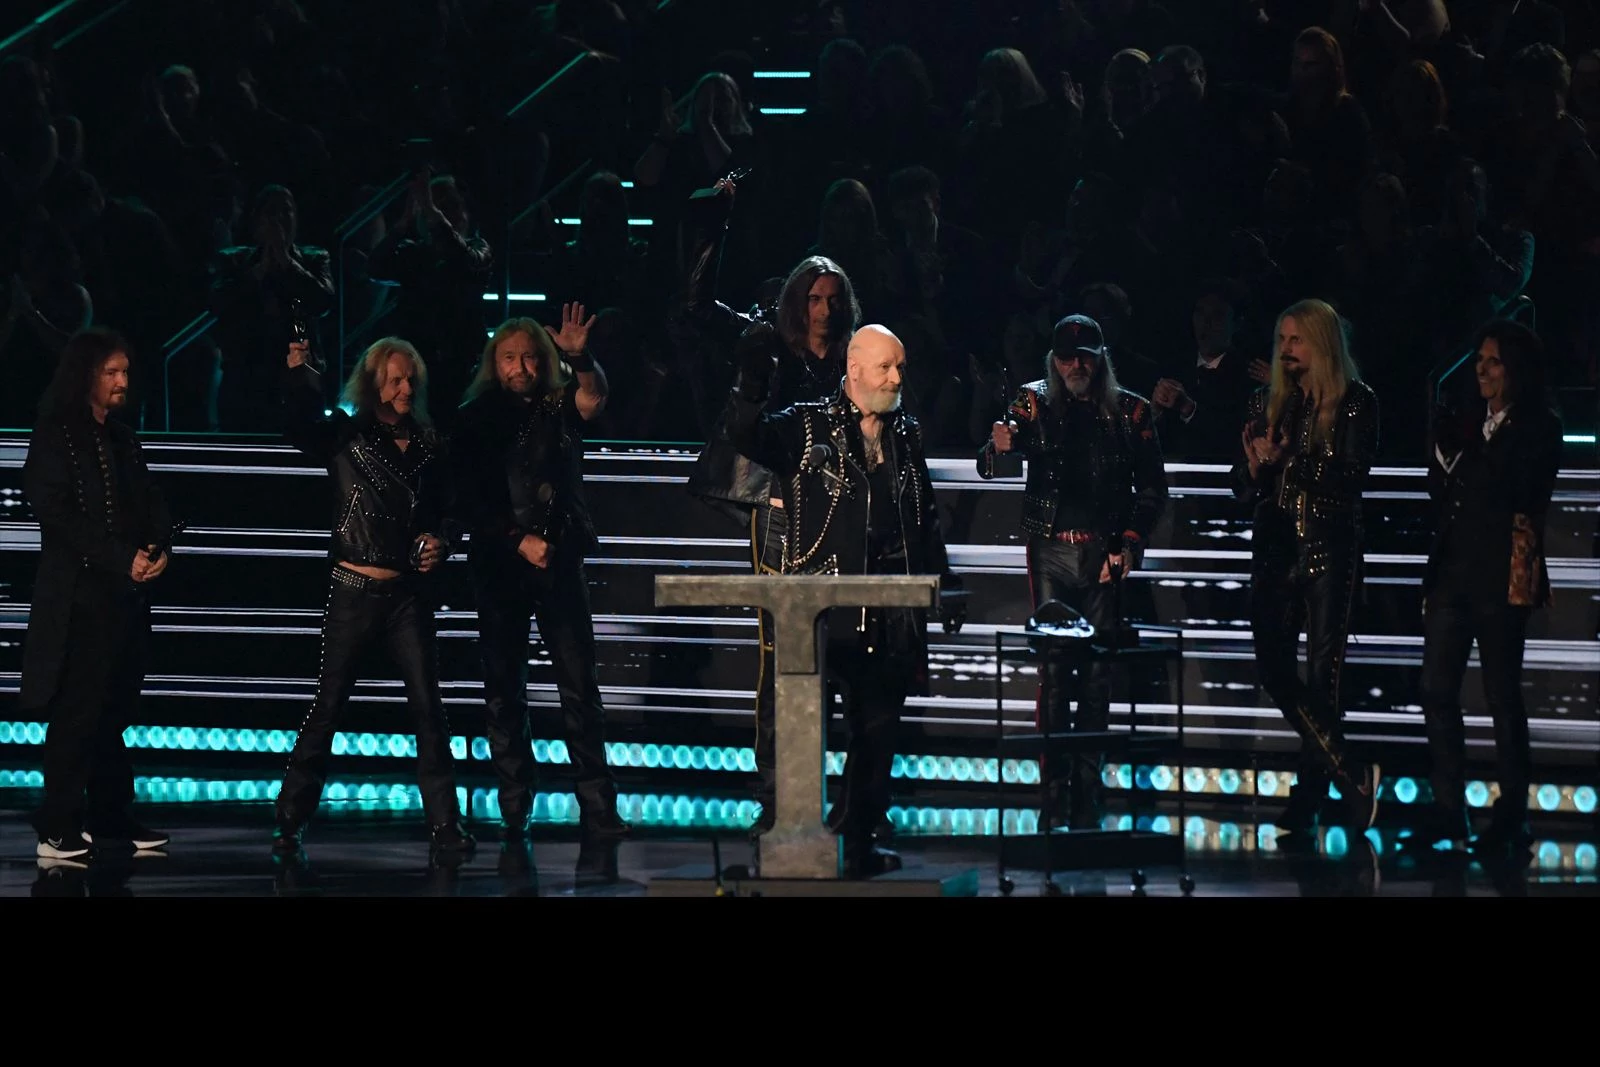 Judas Priest brings true sound and look of metal to the Rock Hall 